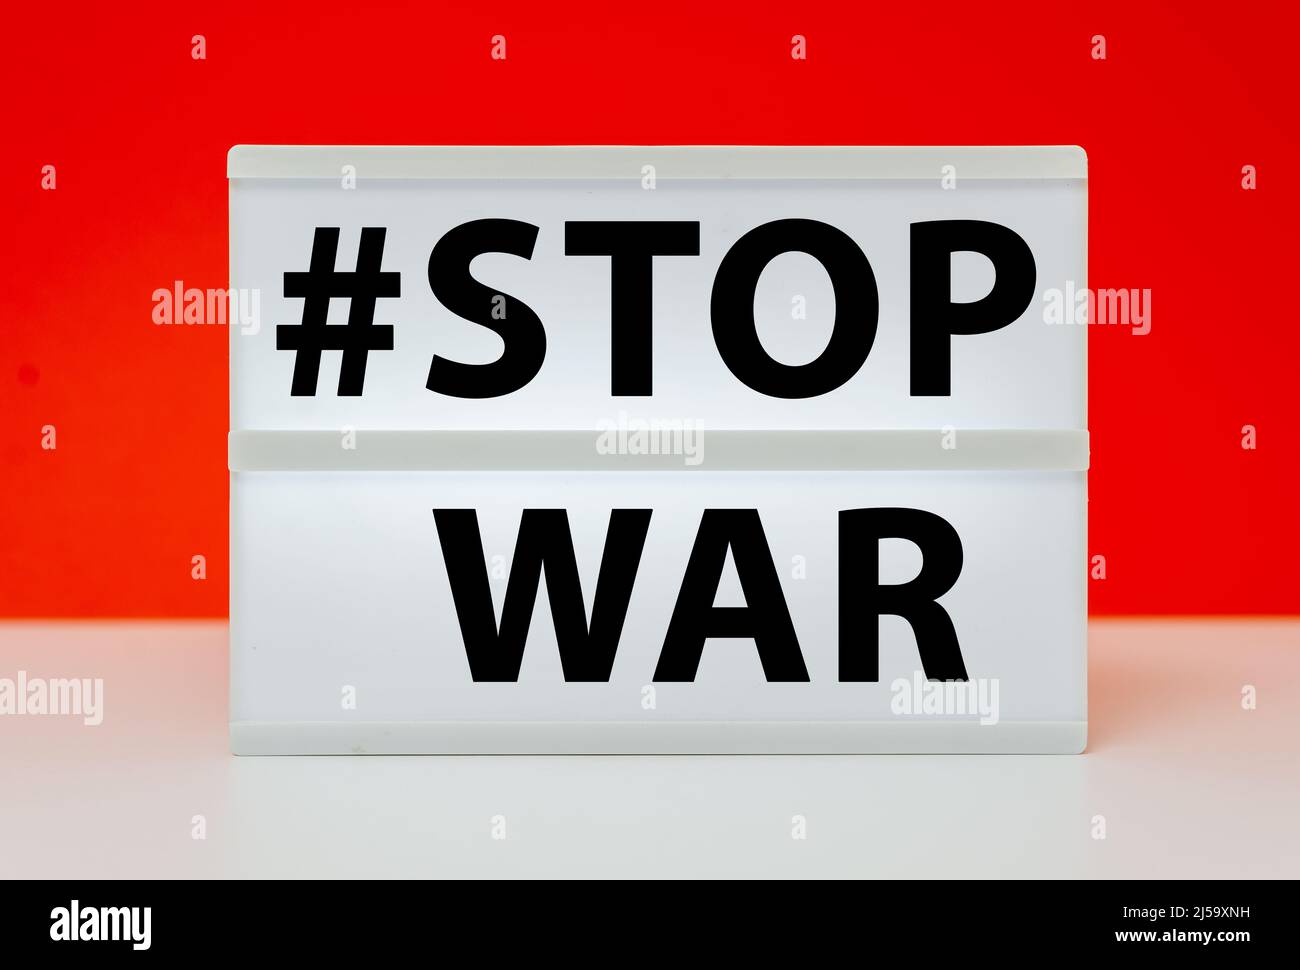 stop war text on white box with red background Stock Photo